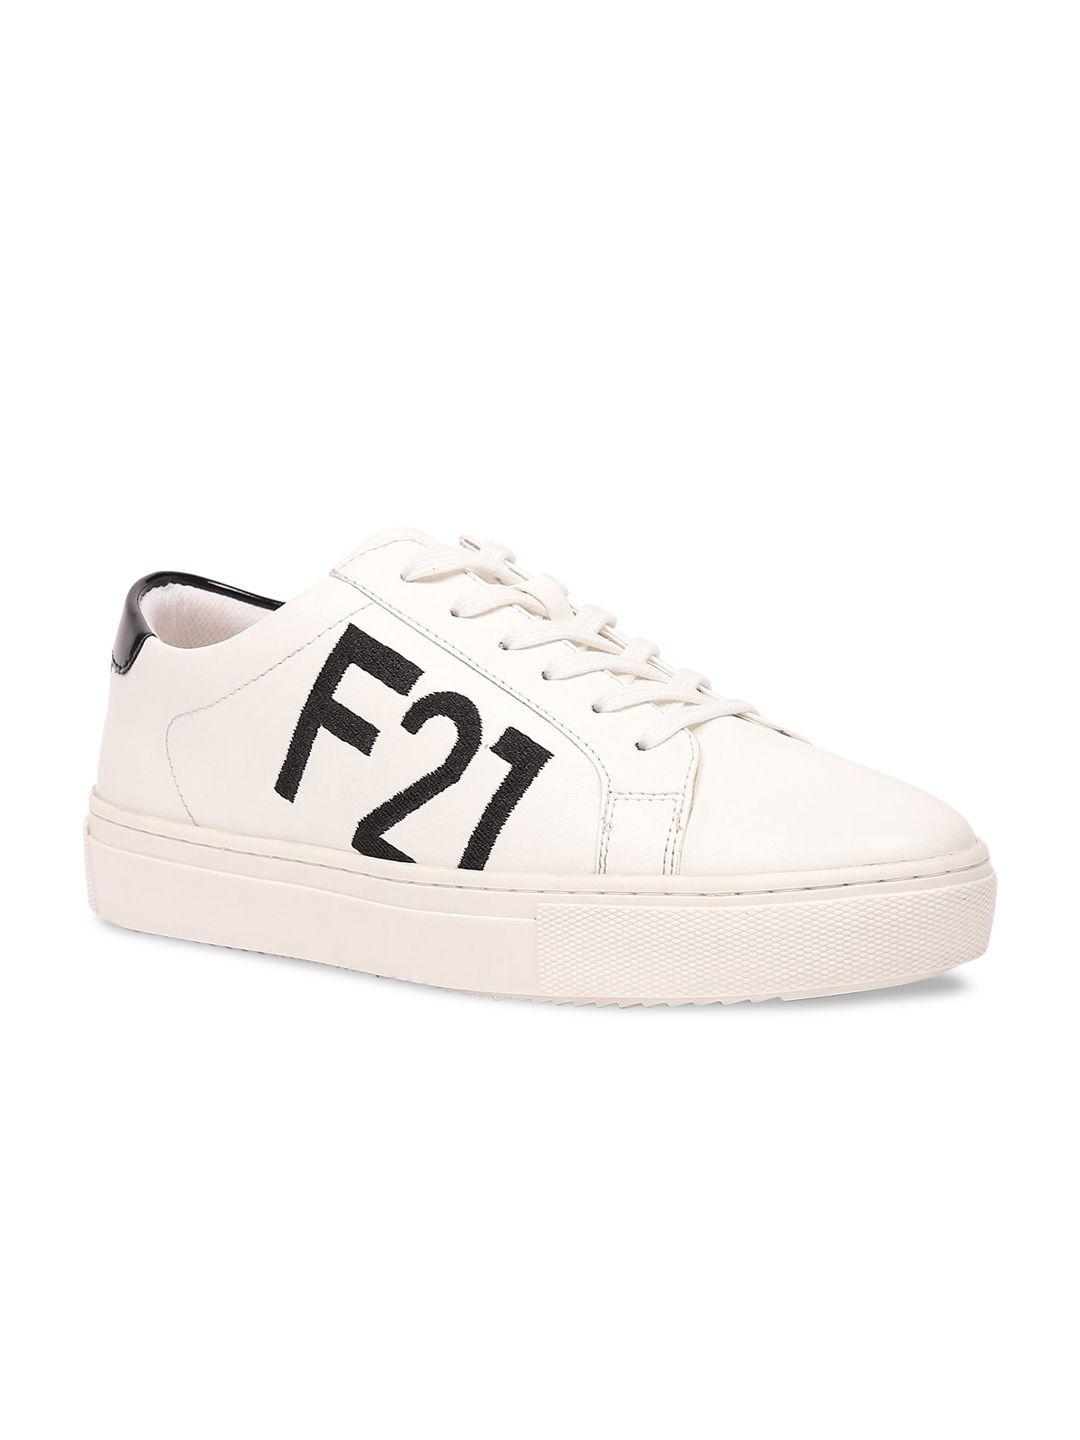 forever 21 women white pu sneakers